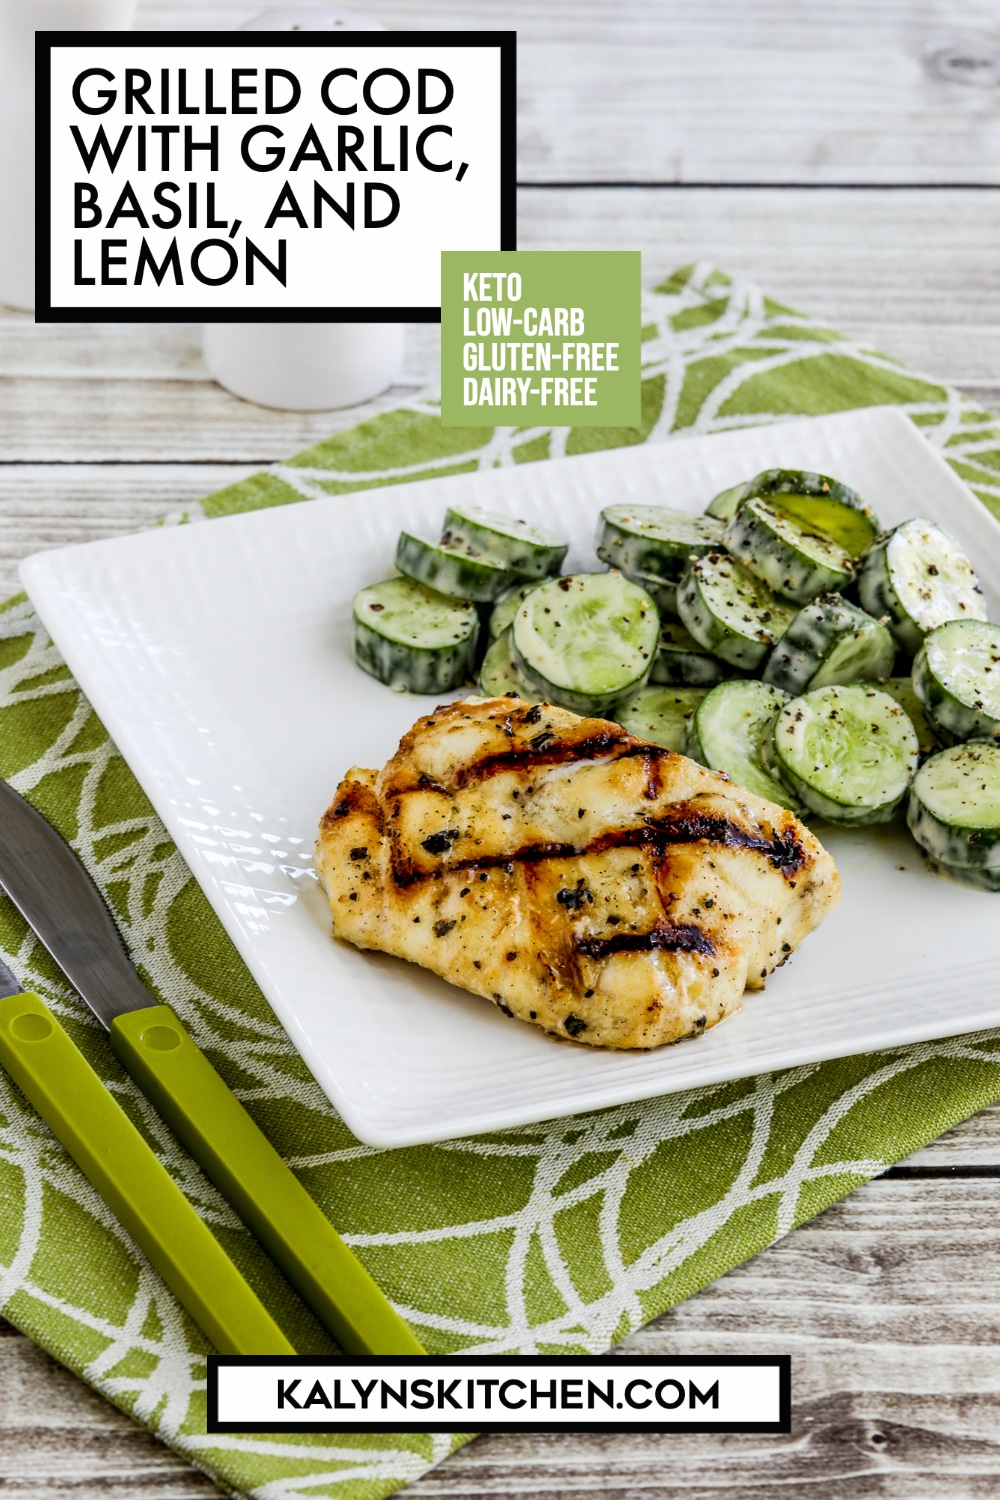 Pinterest image of Grilled Cod with Garlic, Basil, and Lemon